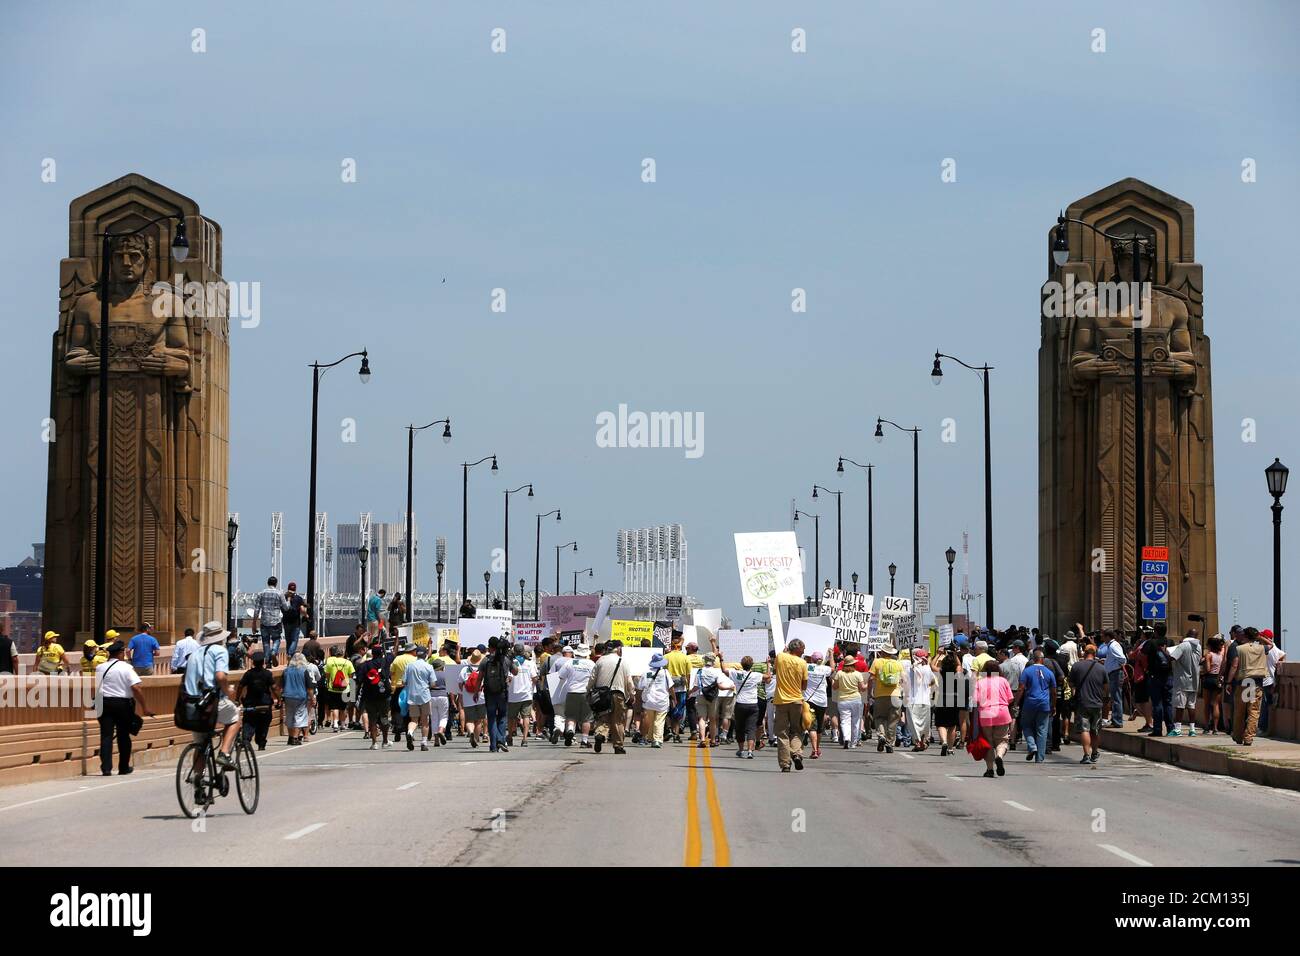 Demonstrators cross the Hope Memorial Bridge during an anti-Trump protest to coincide with the Republican National Convention in Cleveland, Ohio, U.S., July 21, 2016.  REUTERS/Andrew Kelly Stock Photo